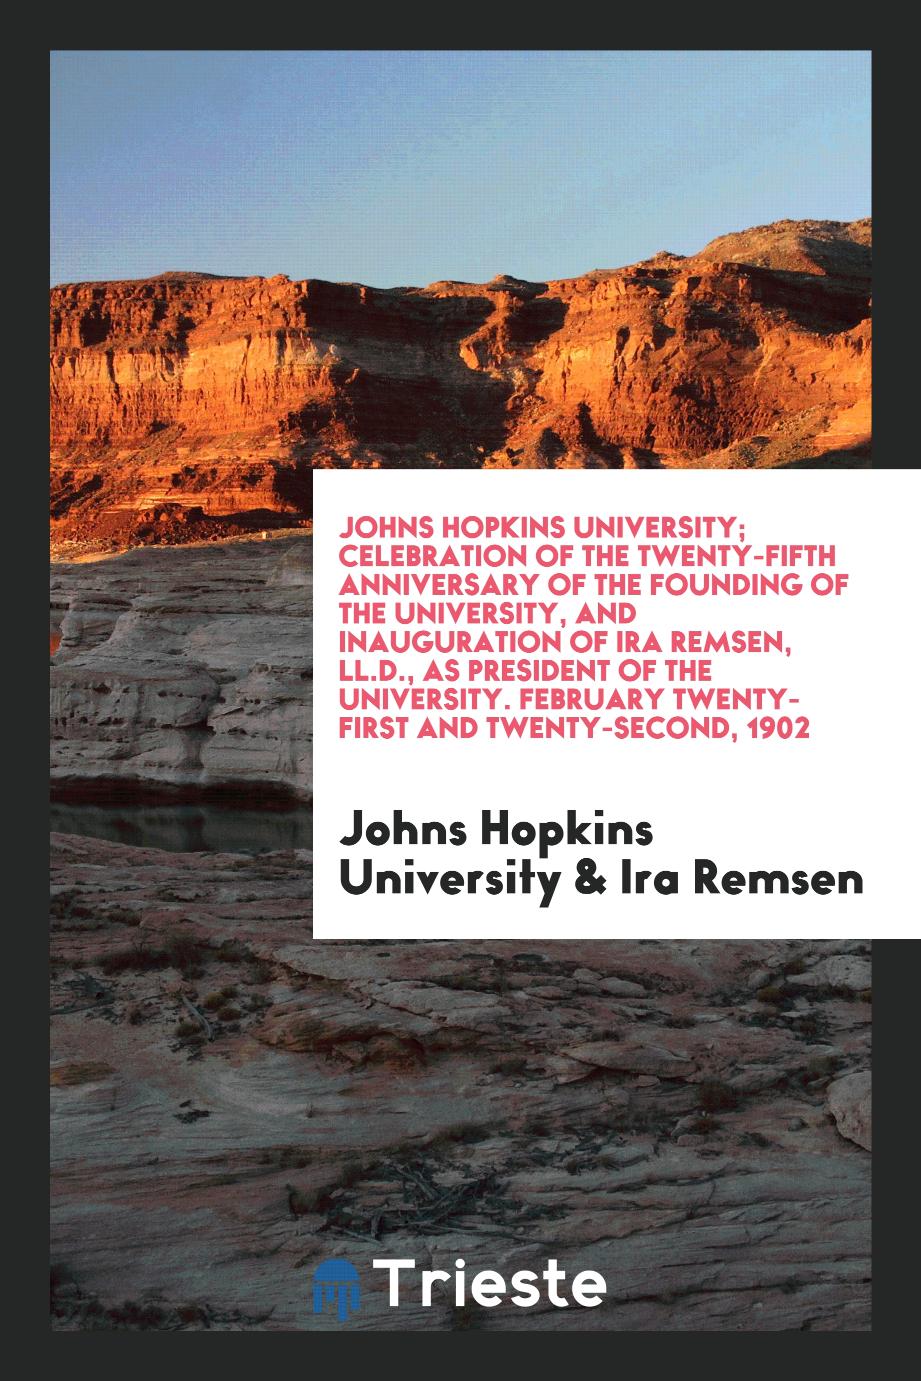 Johns Hopkins University; celebration of the twenty-fifth anniversary of the founding of the university, and inauguration of Ira Remsen, LL.D., as president of the university. February twenty-first and twenty-second, 1902